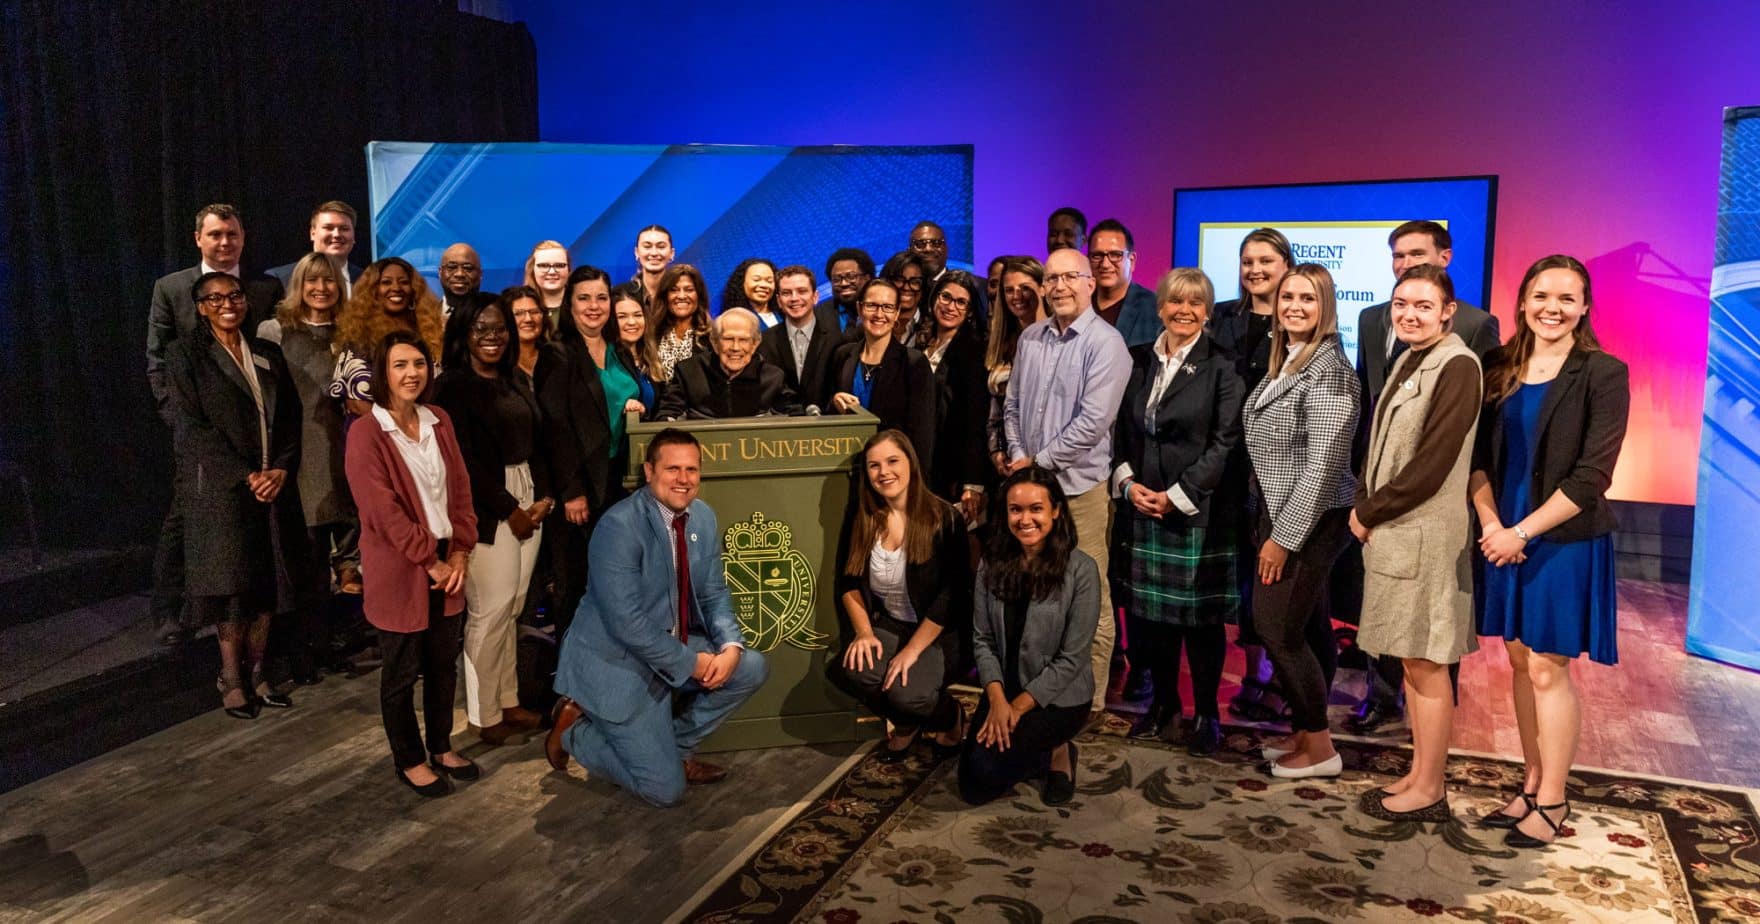 Dr. M.G. “Pat” Robertson with students at the College of Health & Behavioral Science’s Chancellor’s Forum.